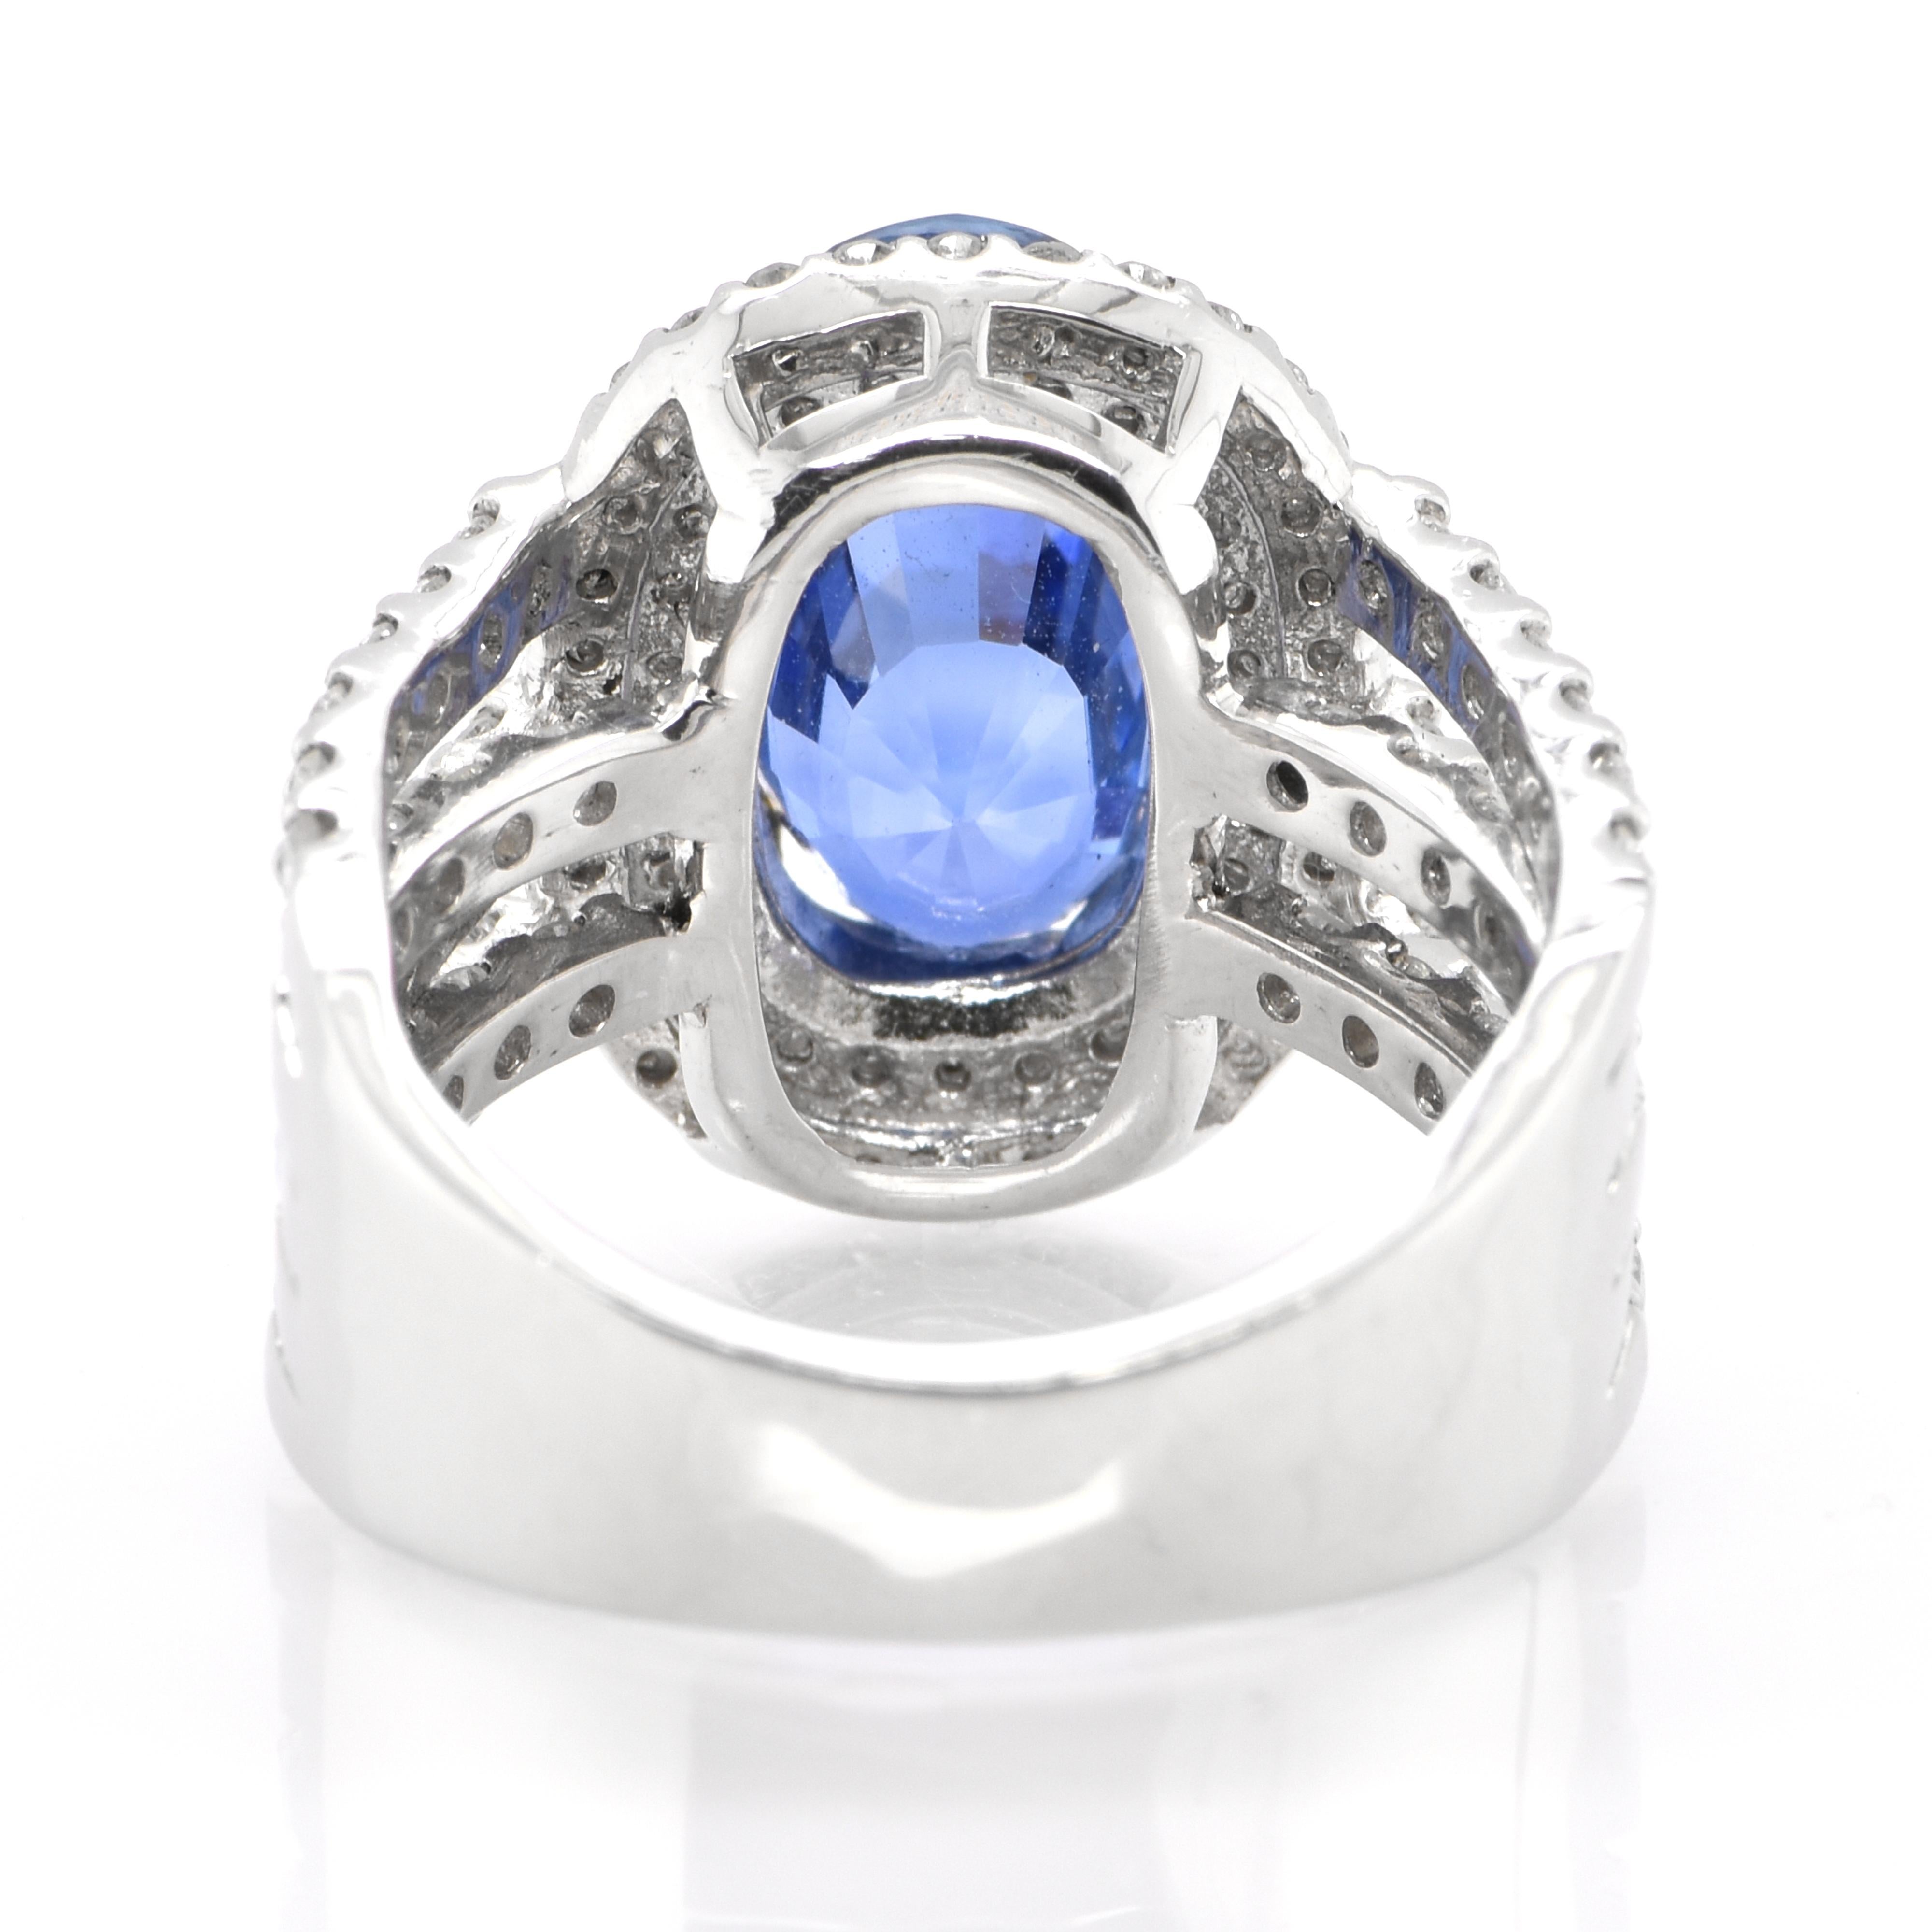 Oval Cut 6.98 Carat Natural Untreated 'No Heat' Sapphire Ring Set in Platinum & Gold